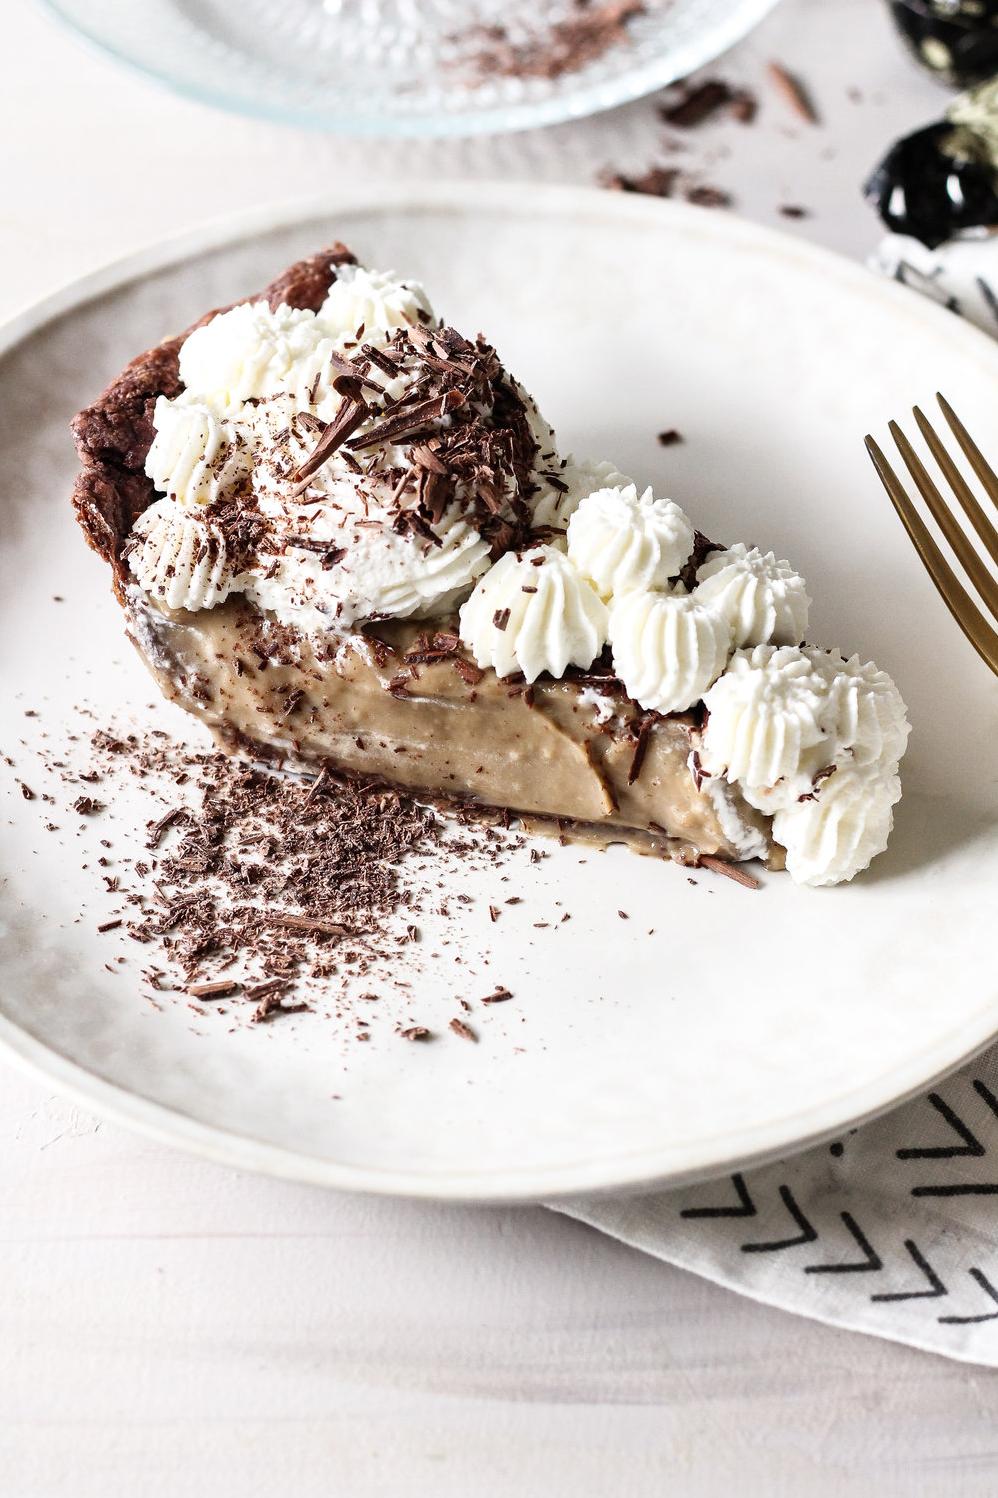  This pie will give your taste buds a caffeine boost.